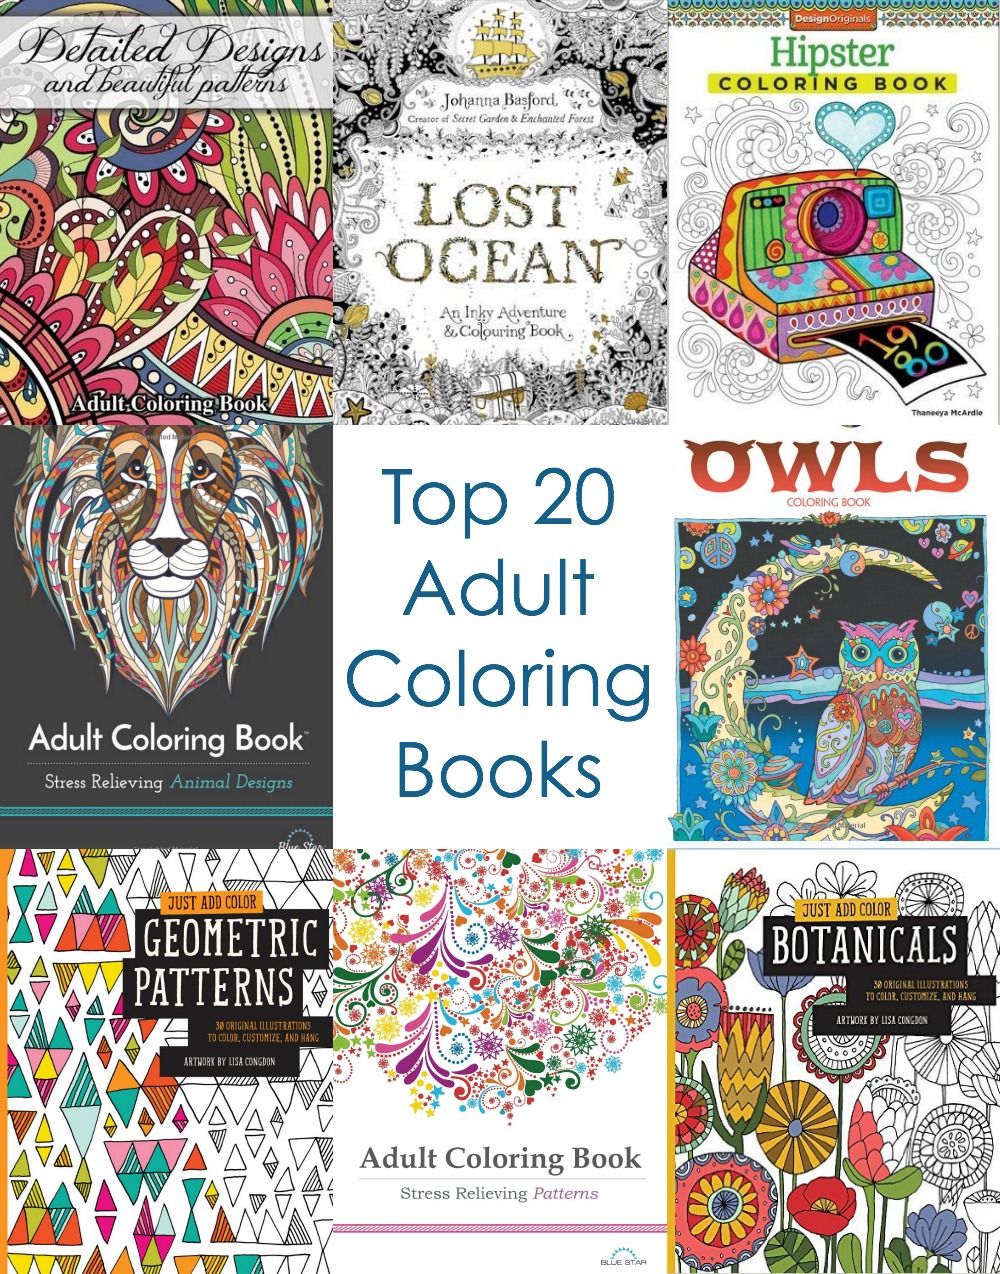 Download Adult Coloring Books to Buy - The Country Chic Cottage